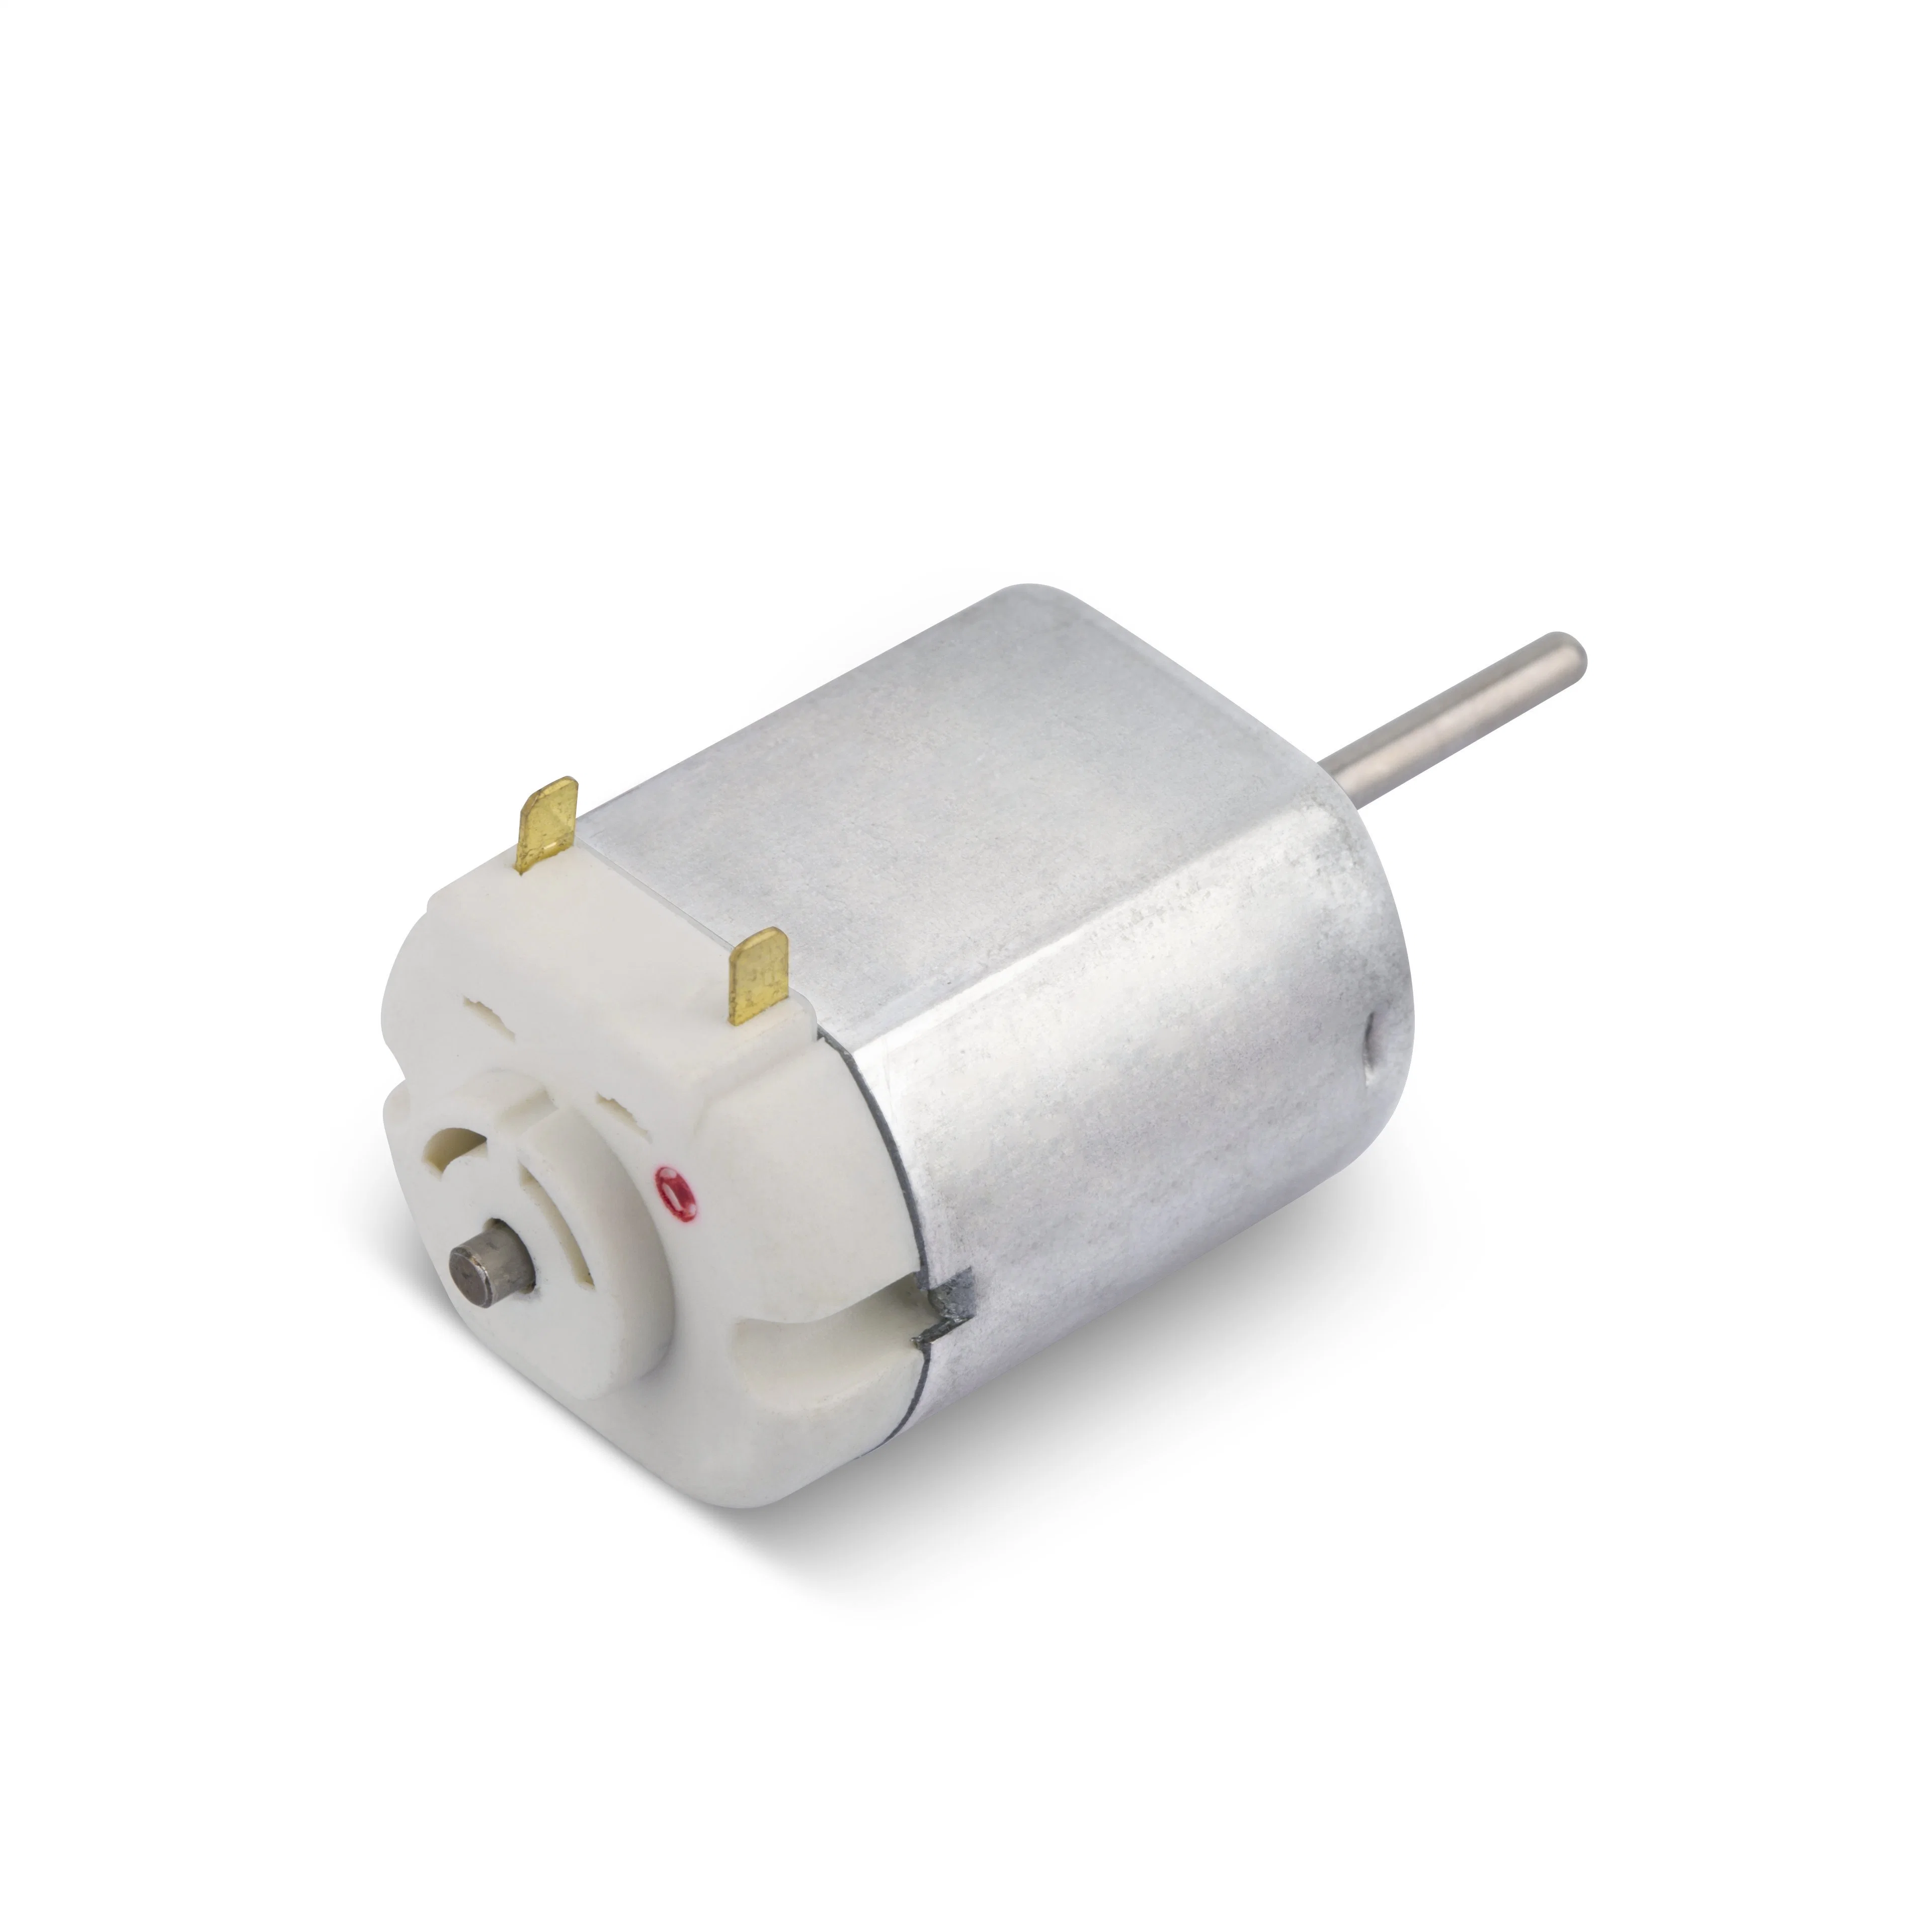 Kinmore 9 Volt DC Motor Electric Vehicle DC Motors DC Electric Motor Stable Performance